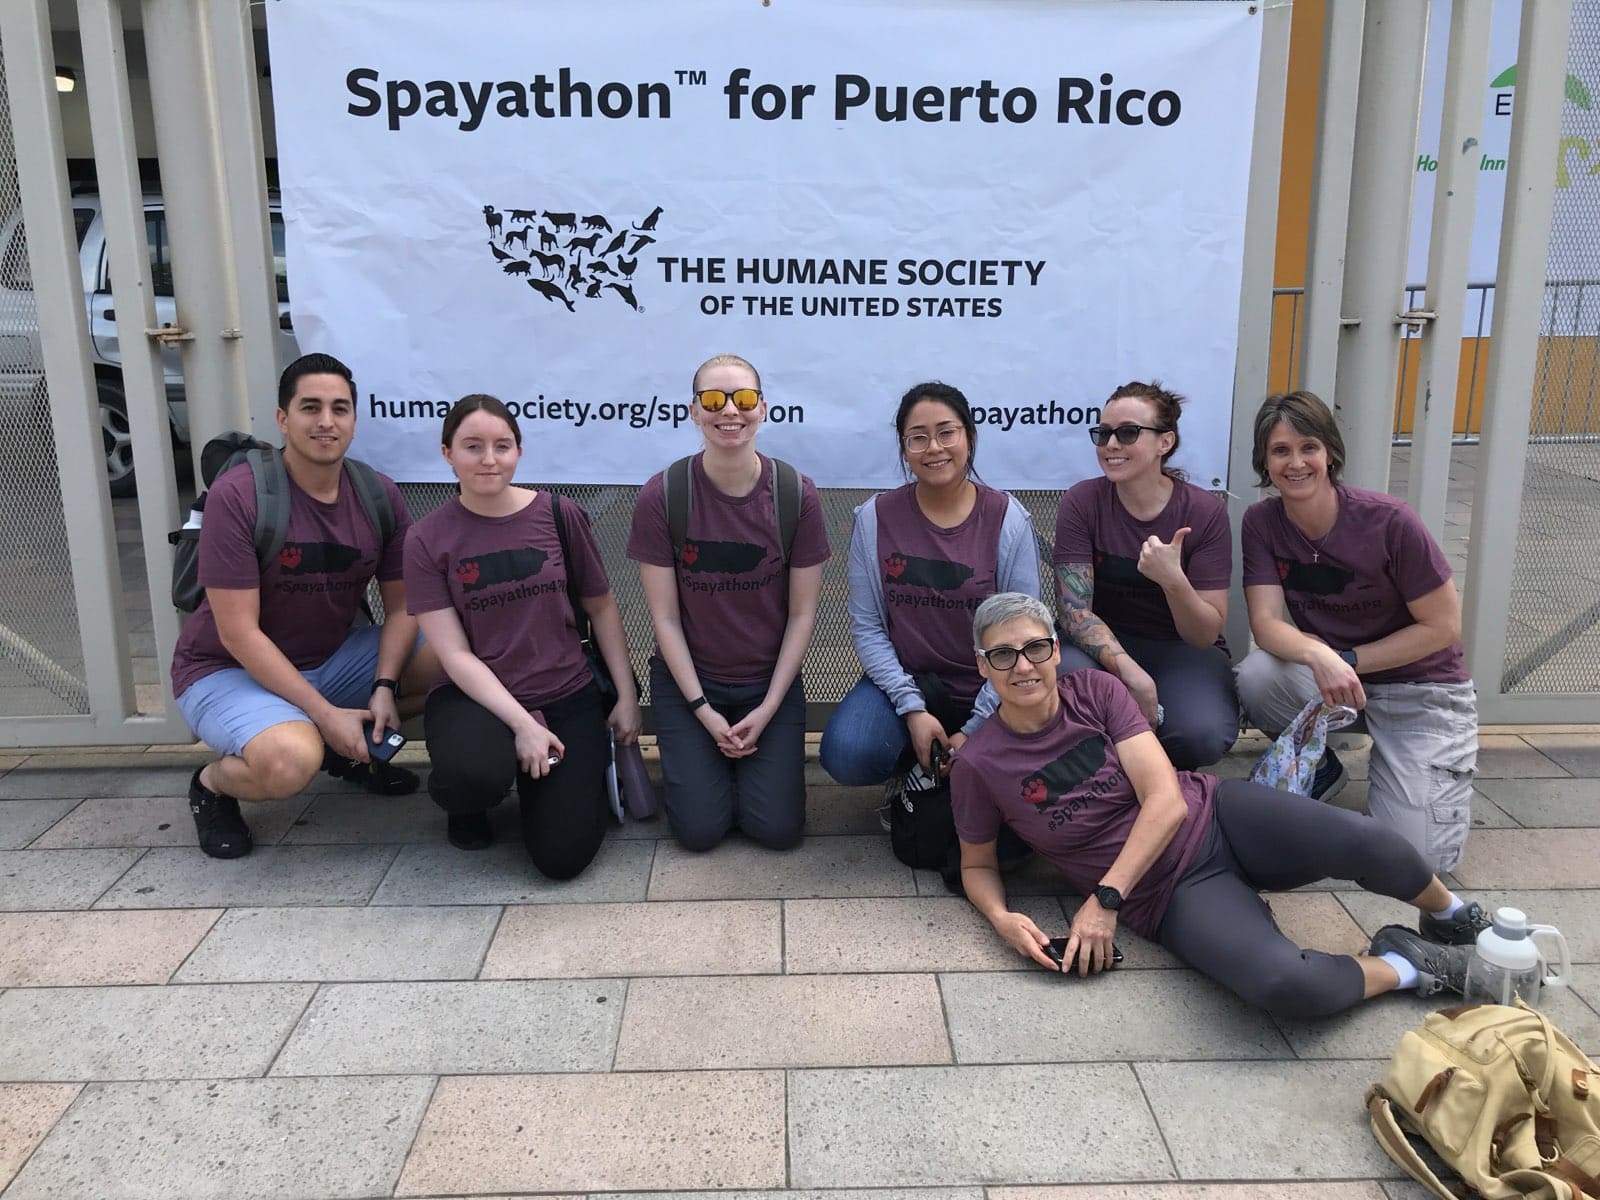 Six people kneel and one person lounges on the ground in front of a white banner advertising the Spayathon for Puerto Rico.